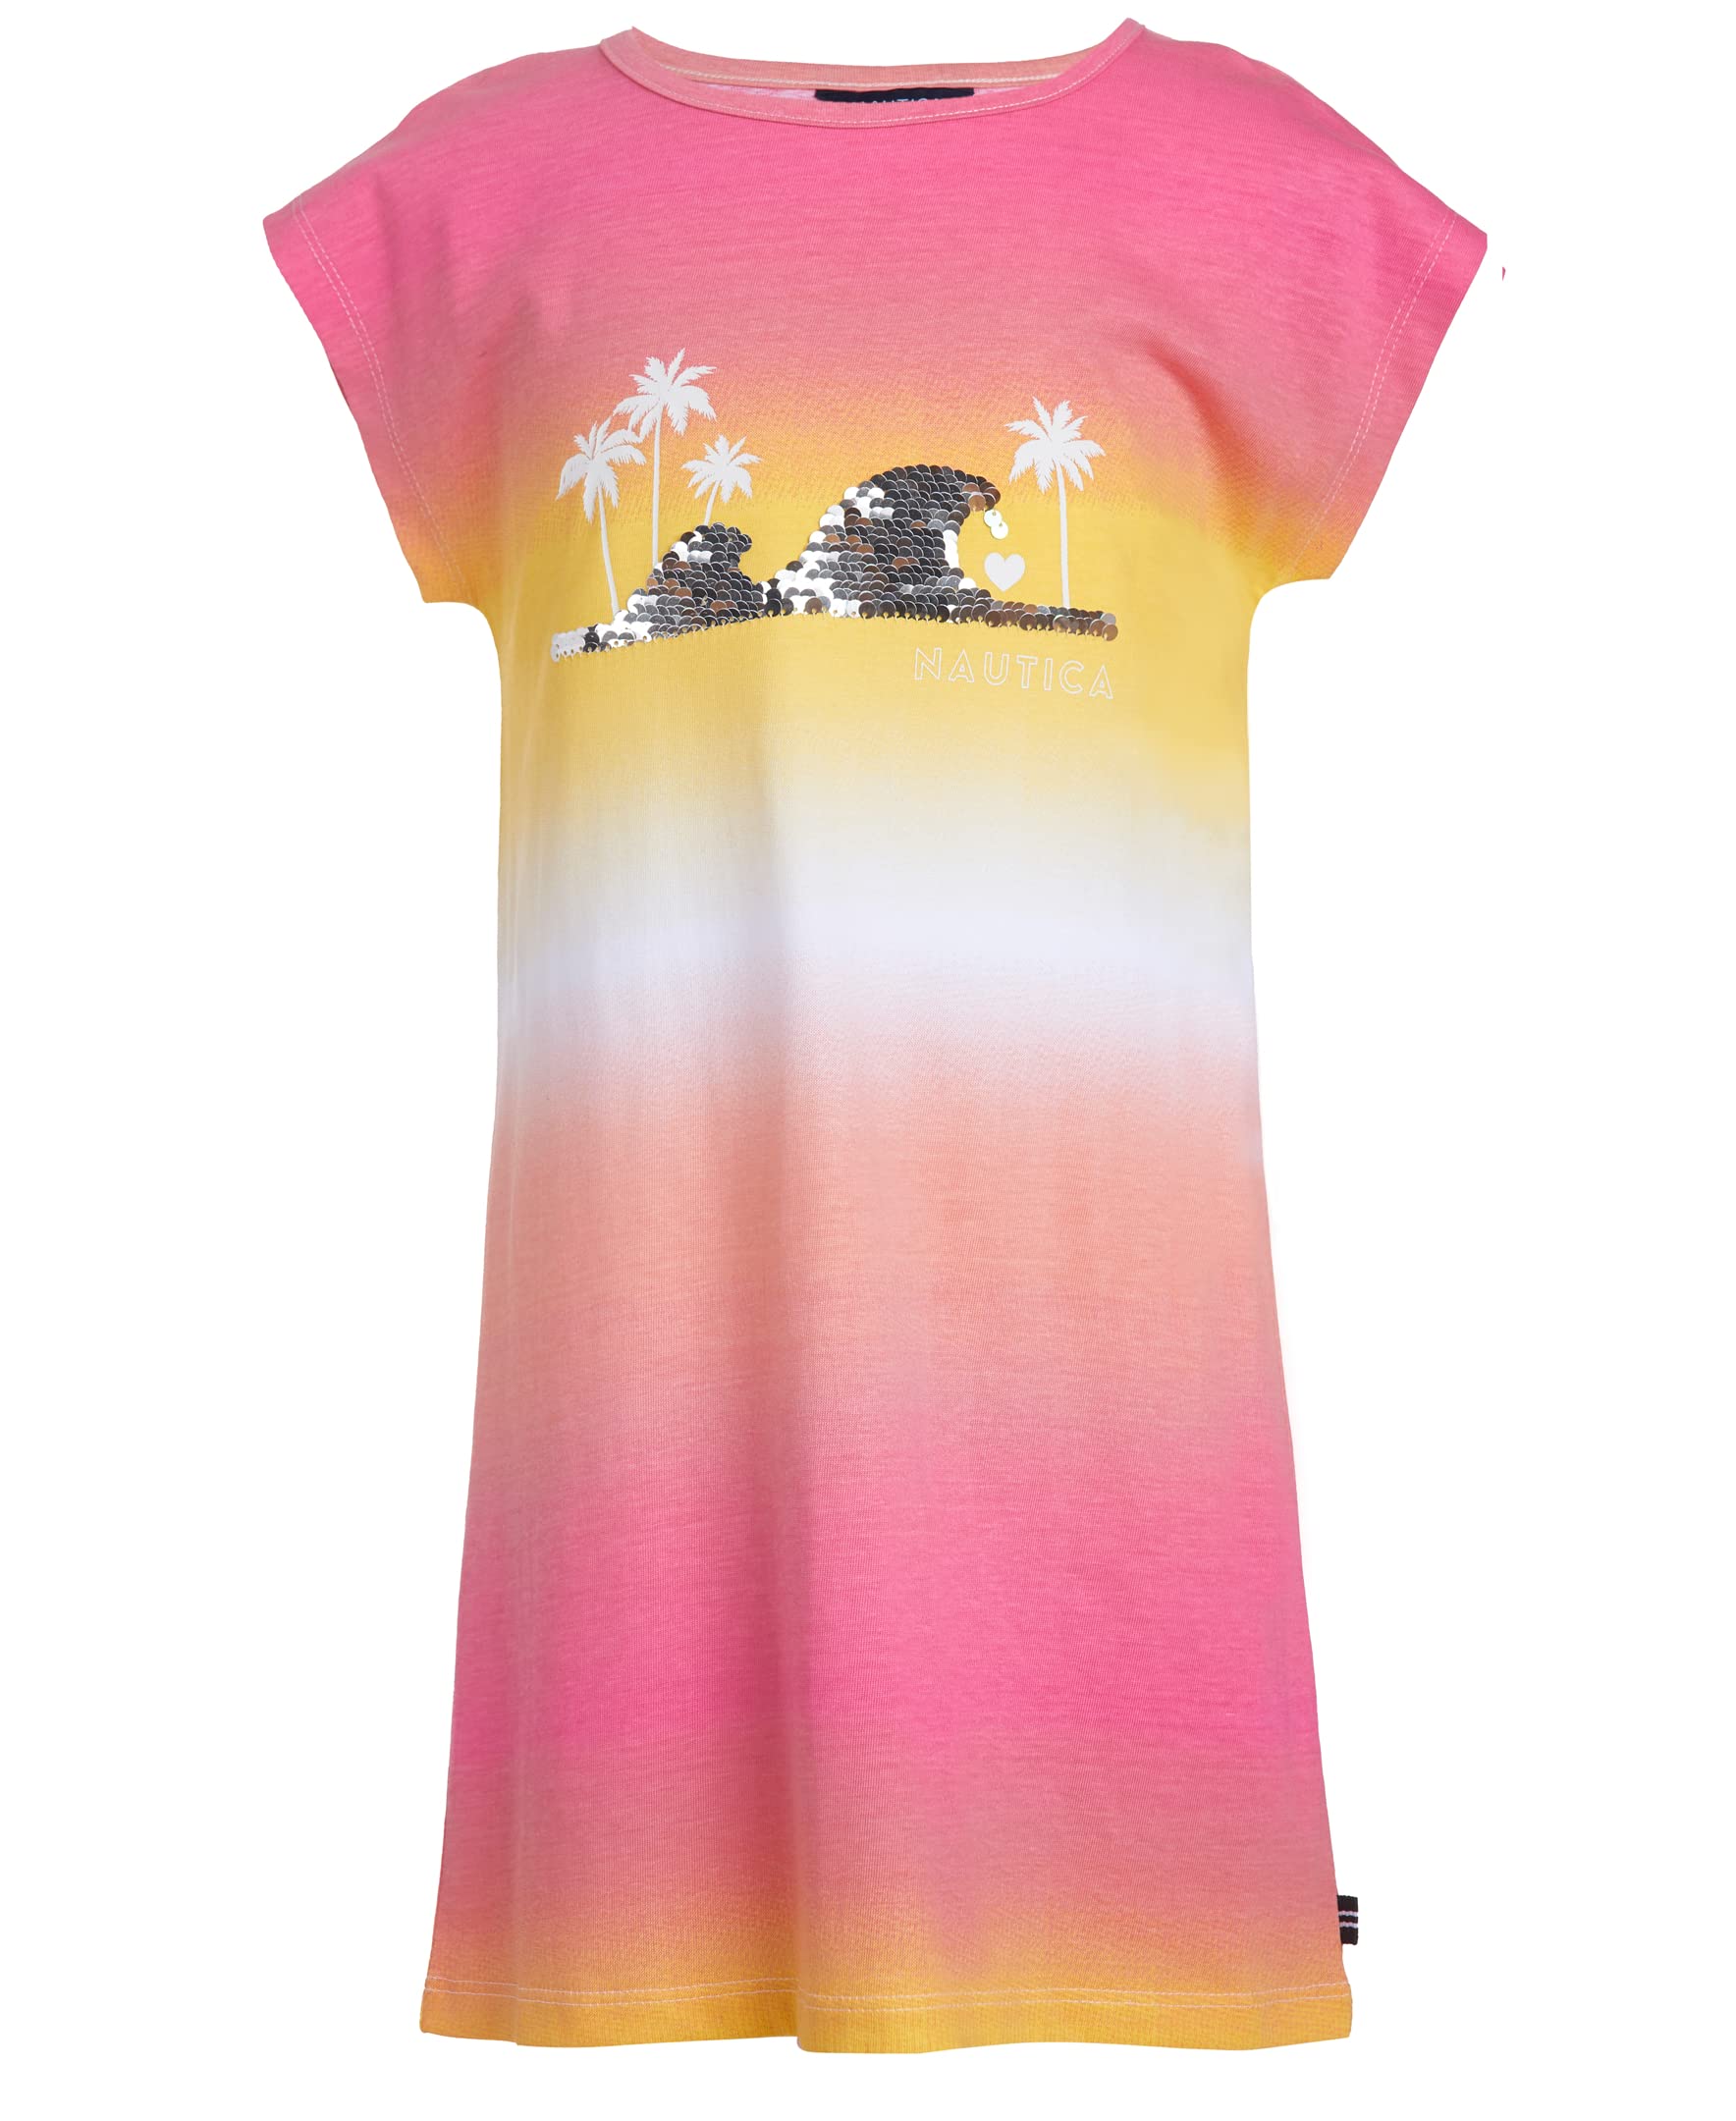 Nautica Girls' Short Sleeve Jersey Tee Dress with Elastic Cinched Waist, Fun Designs & Colors, Pink Carnation Wave, 6X